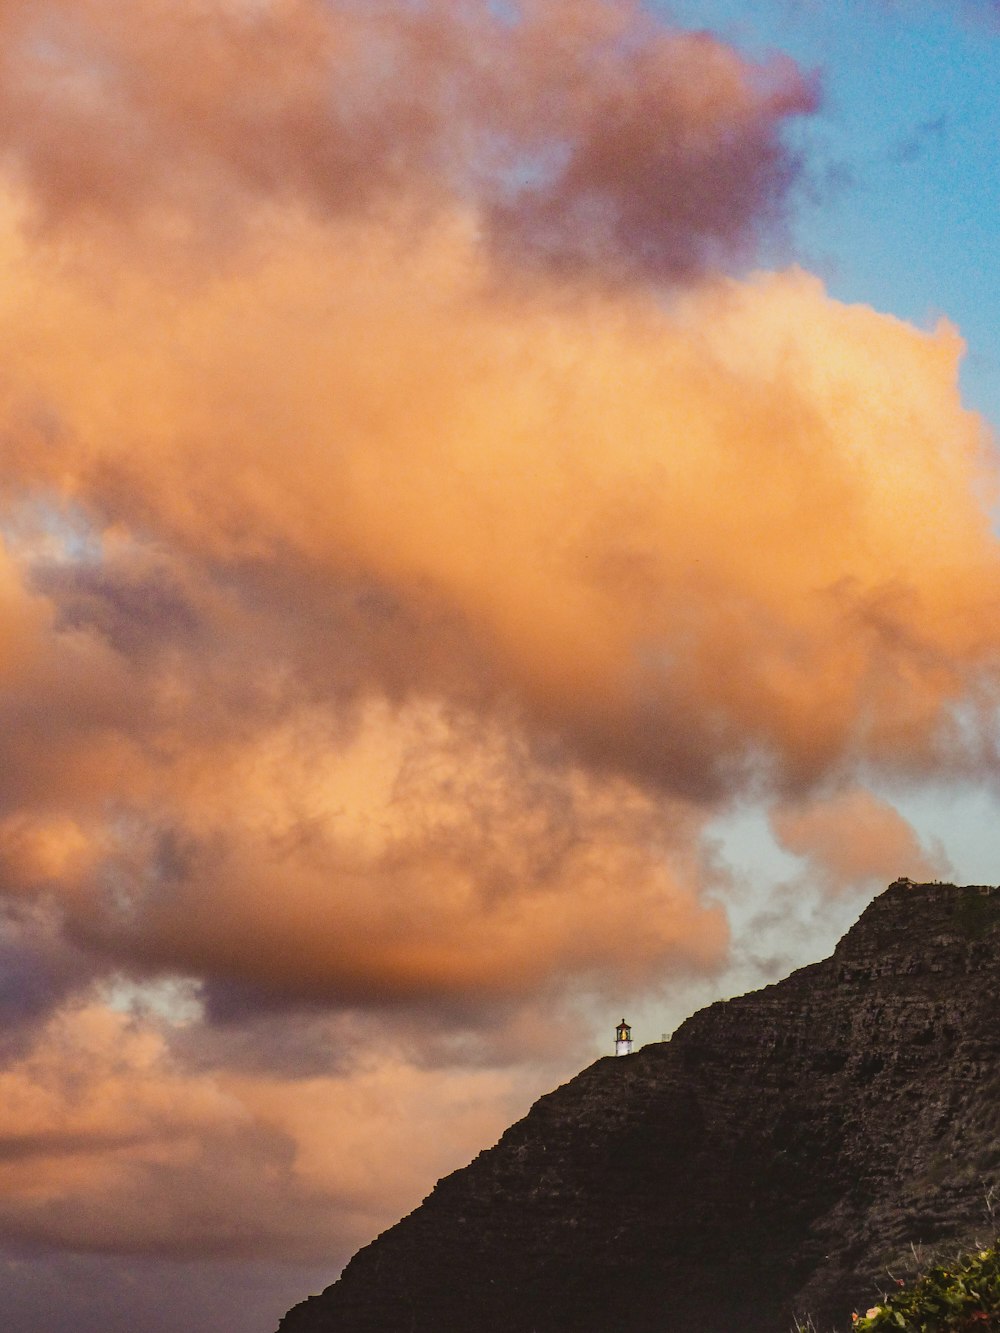 a person standing on top of a mountain under a cloudy sky